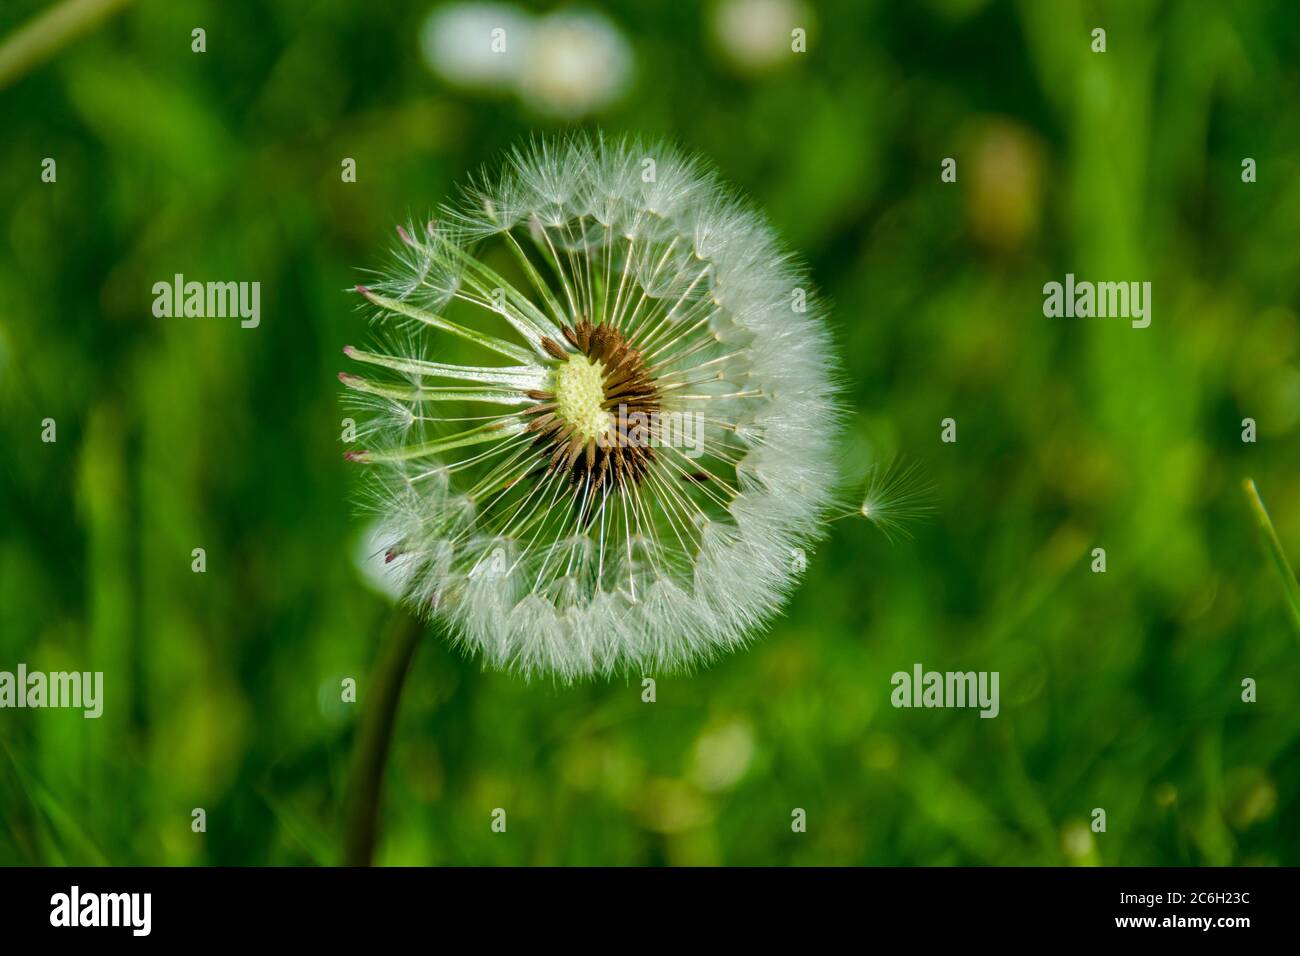 A dandelion with its seeds at sight on a green background, Taraxacum erythrospermum Stock Photo